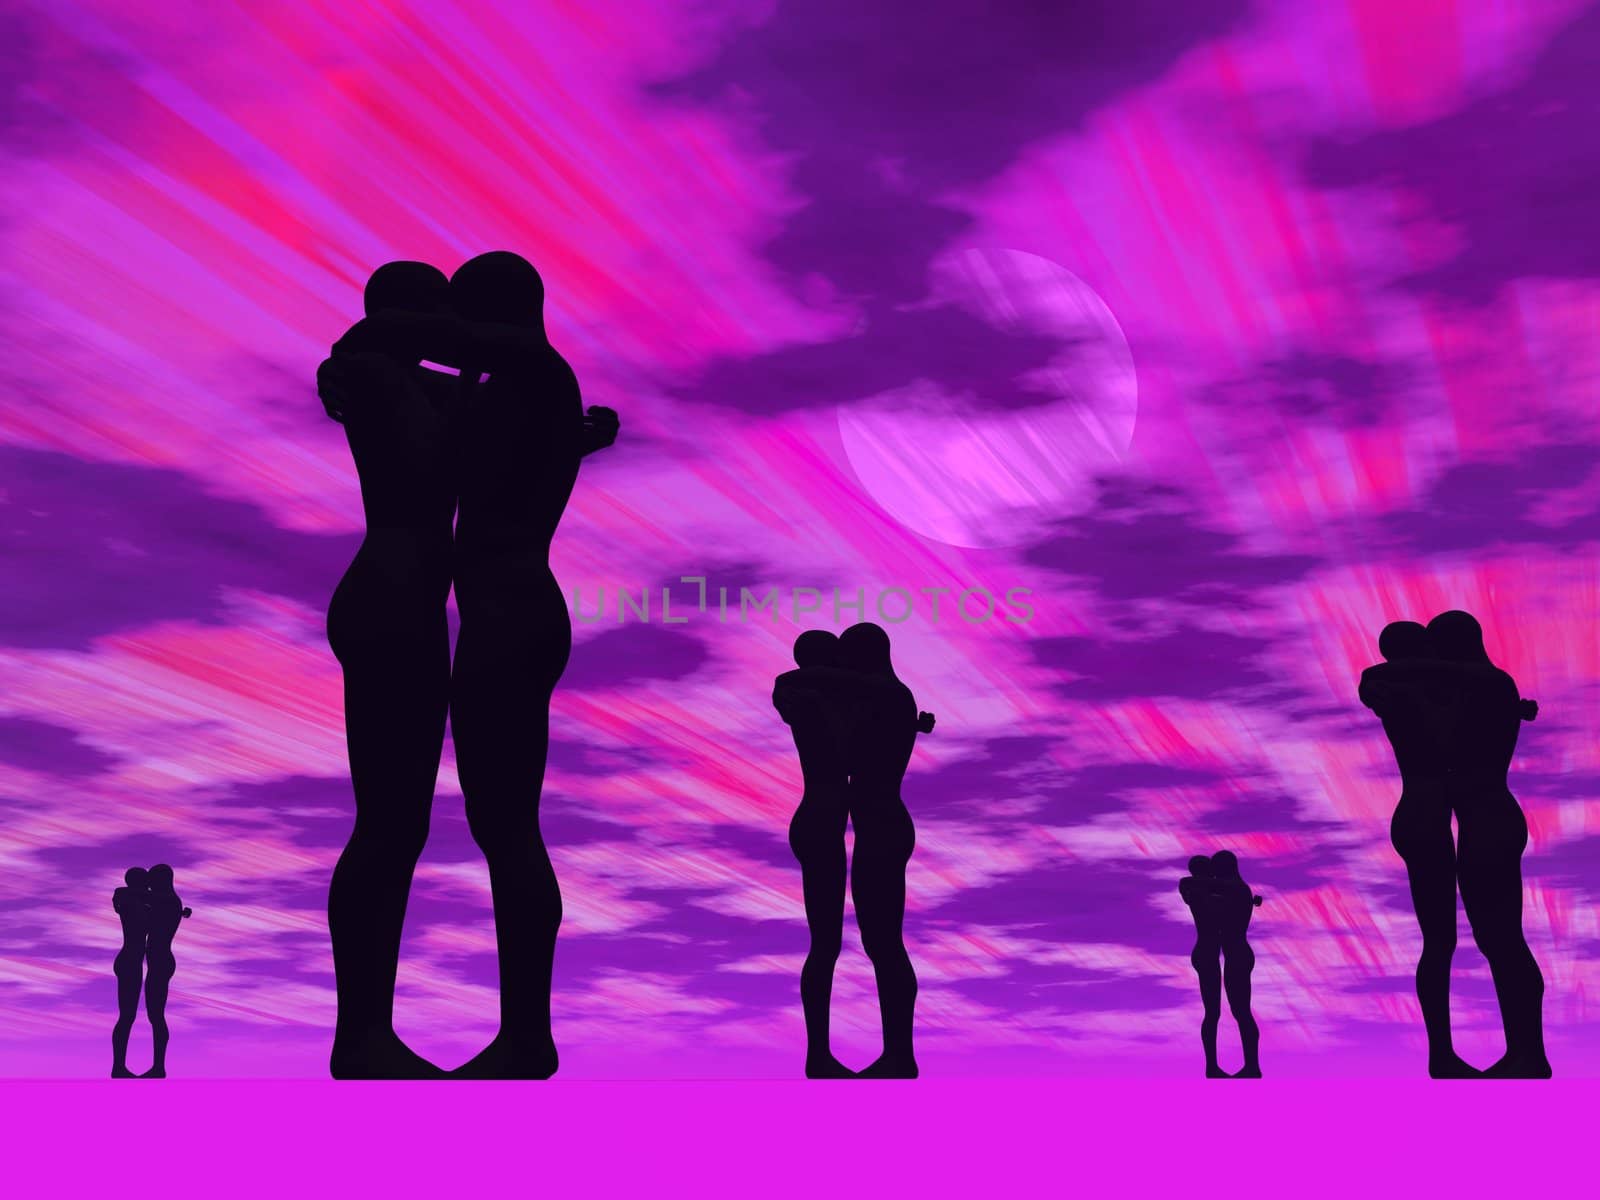 Shadows of many couple hugging in pink and violet background with full moon and rays